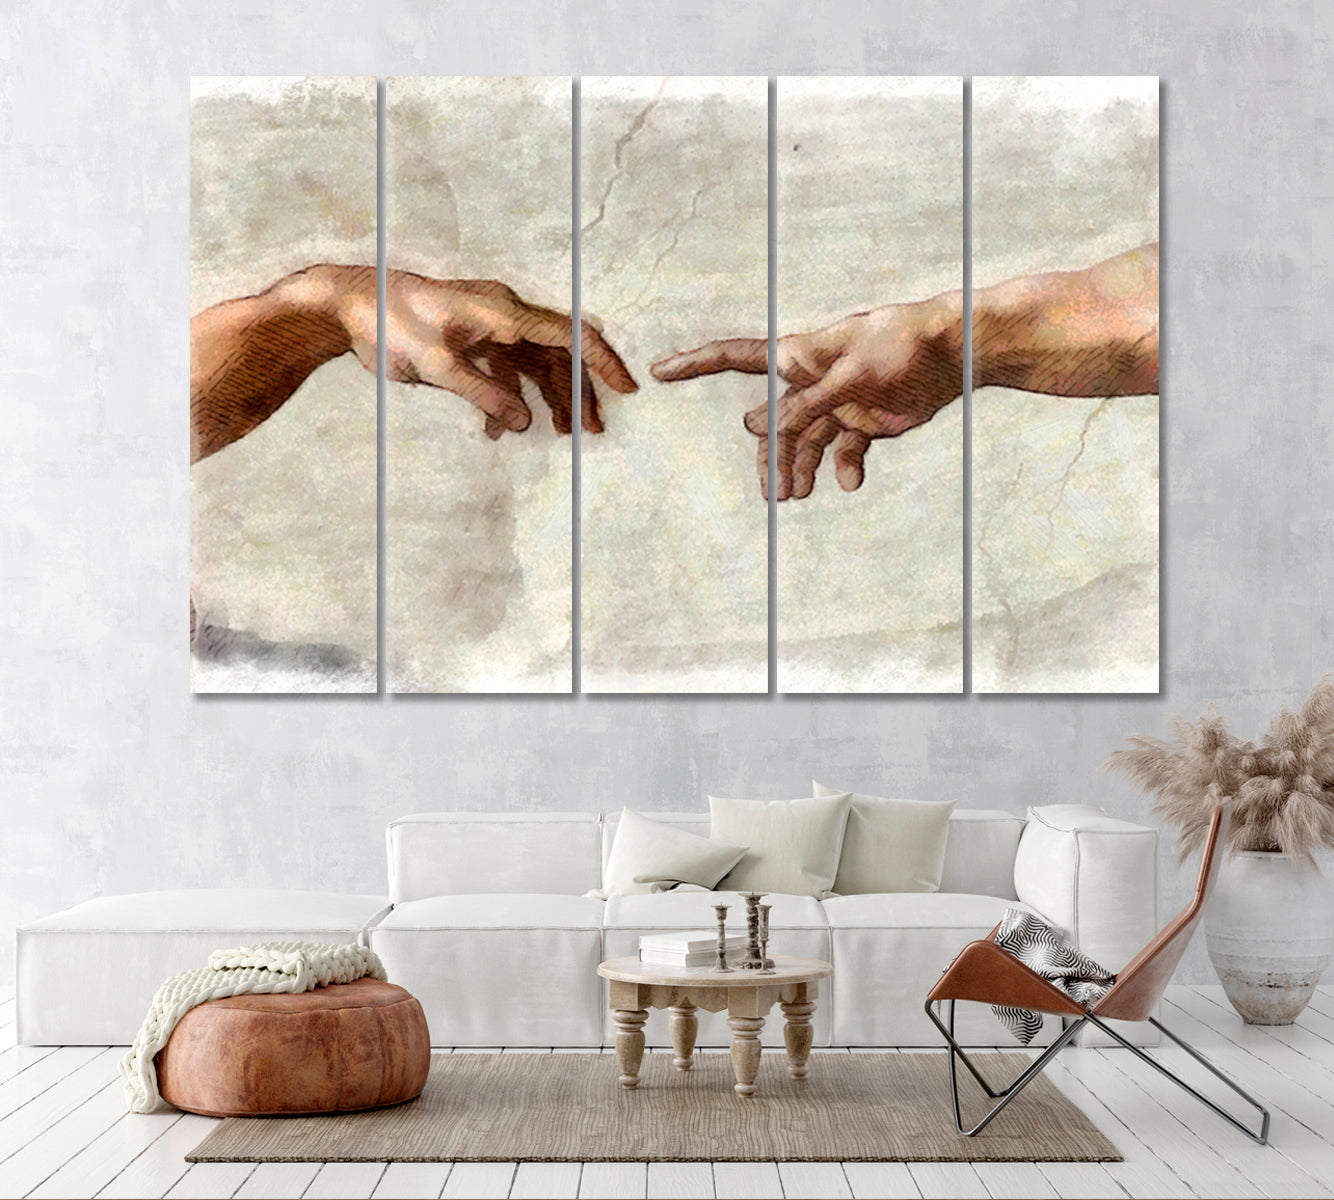 The Creation of Adam Canvas Print ArtLexy 5 Panels 36"x24" inches 